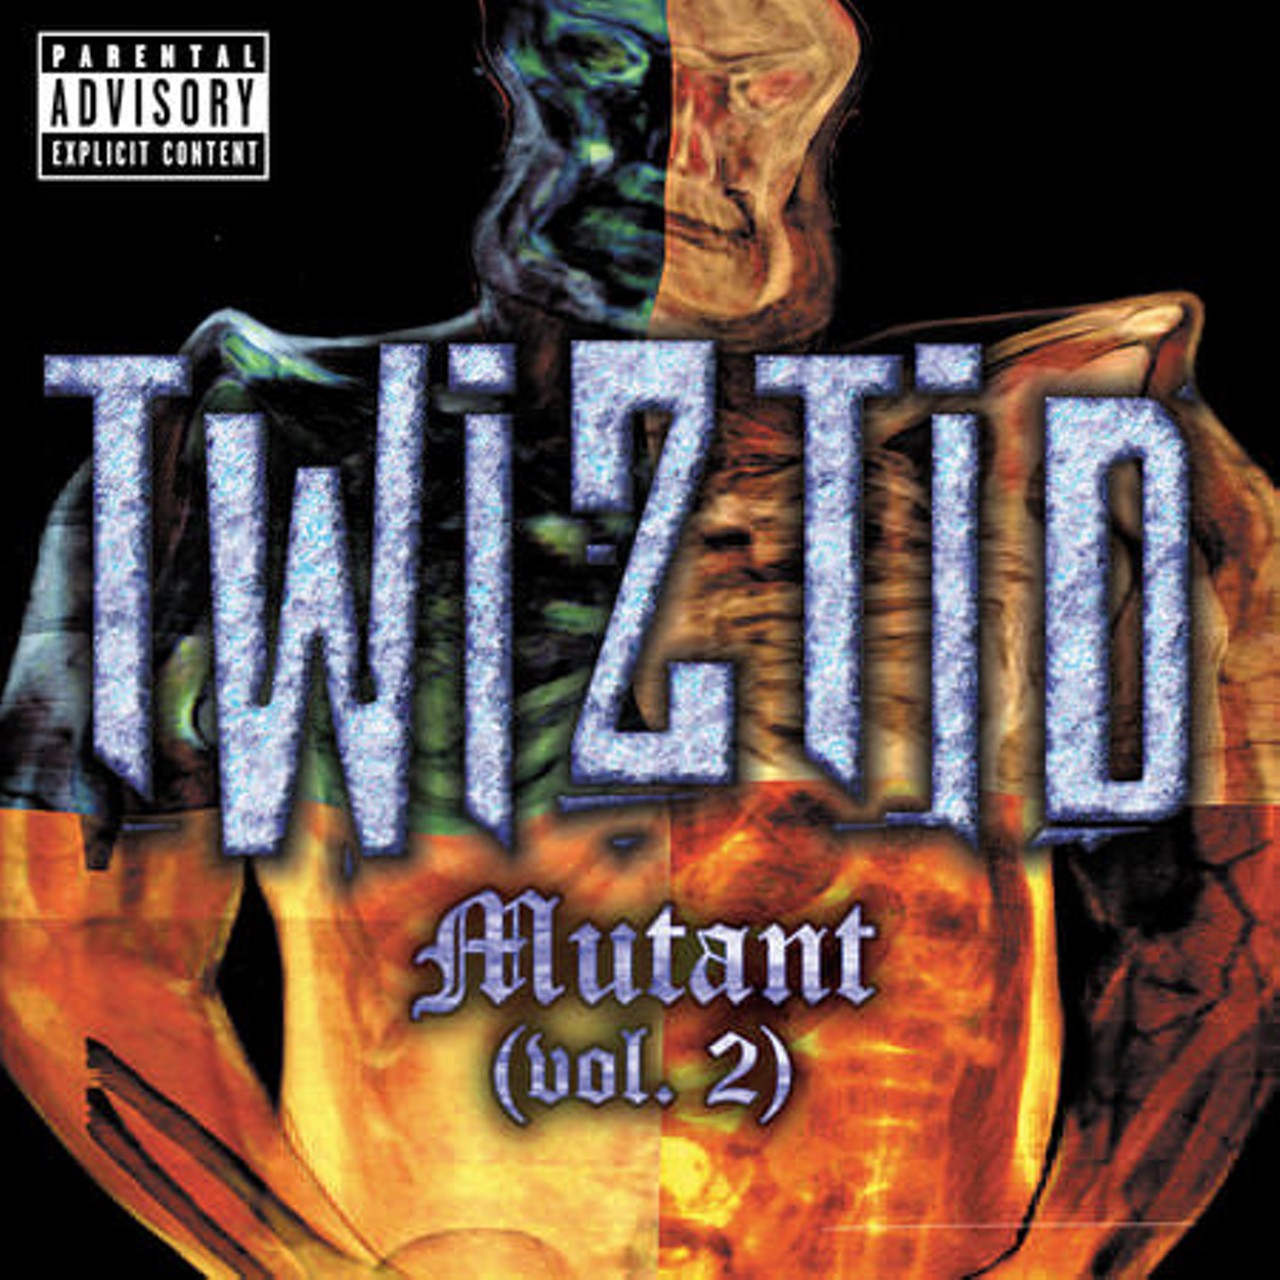 Twiztid
“Mutant X” 
ICP might be the head-honchos over at Psychopathic Records, but Twiztid know how to pen a ludicrous-yet-enjoyable horror rap yarn. Madrox and Monoxide are less kooky clowns and more foul-mouthed zombie kids, hence lyrics like, “I was born an accident, off the ripper, Free spirit but a mind drifter, Vampire labeled me the blood sipper.” Dunno about you, but that just makes us feel bad for poor old Mutant X.